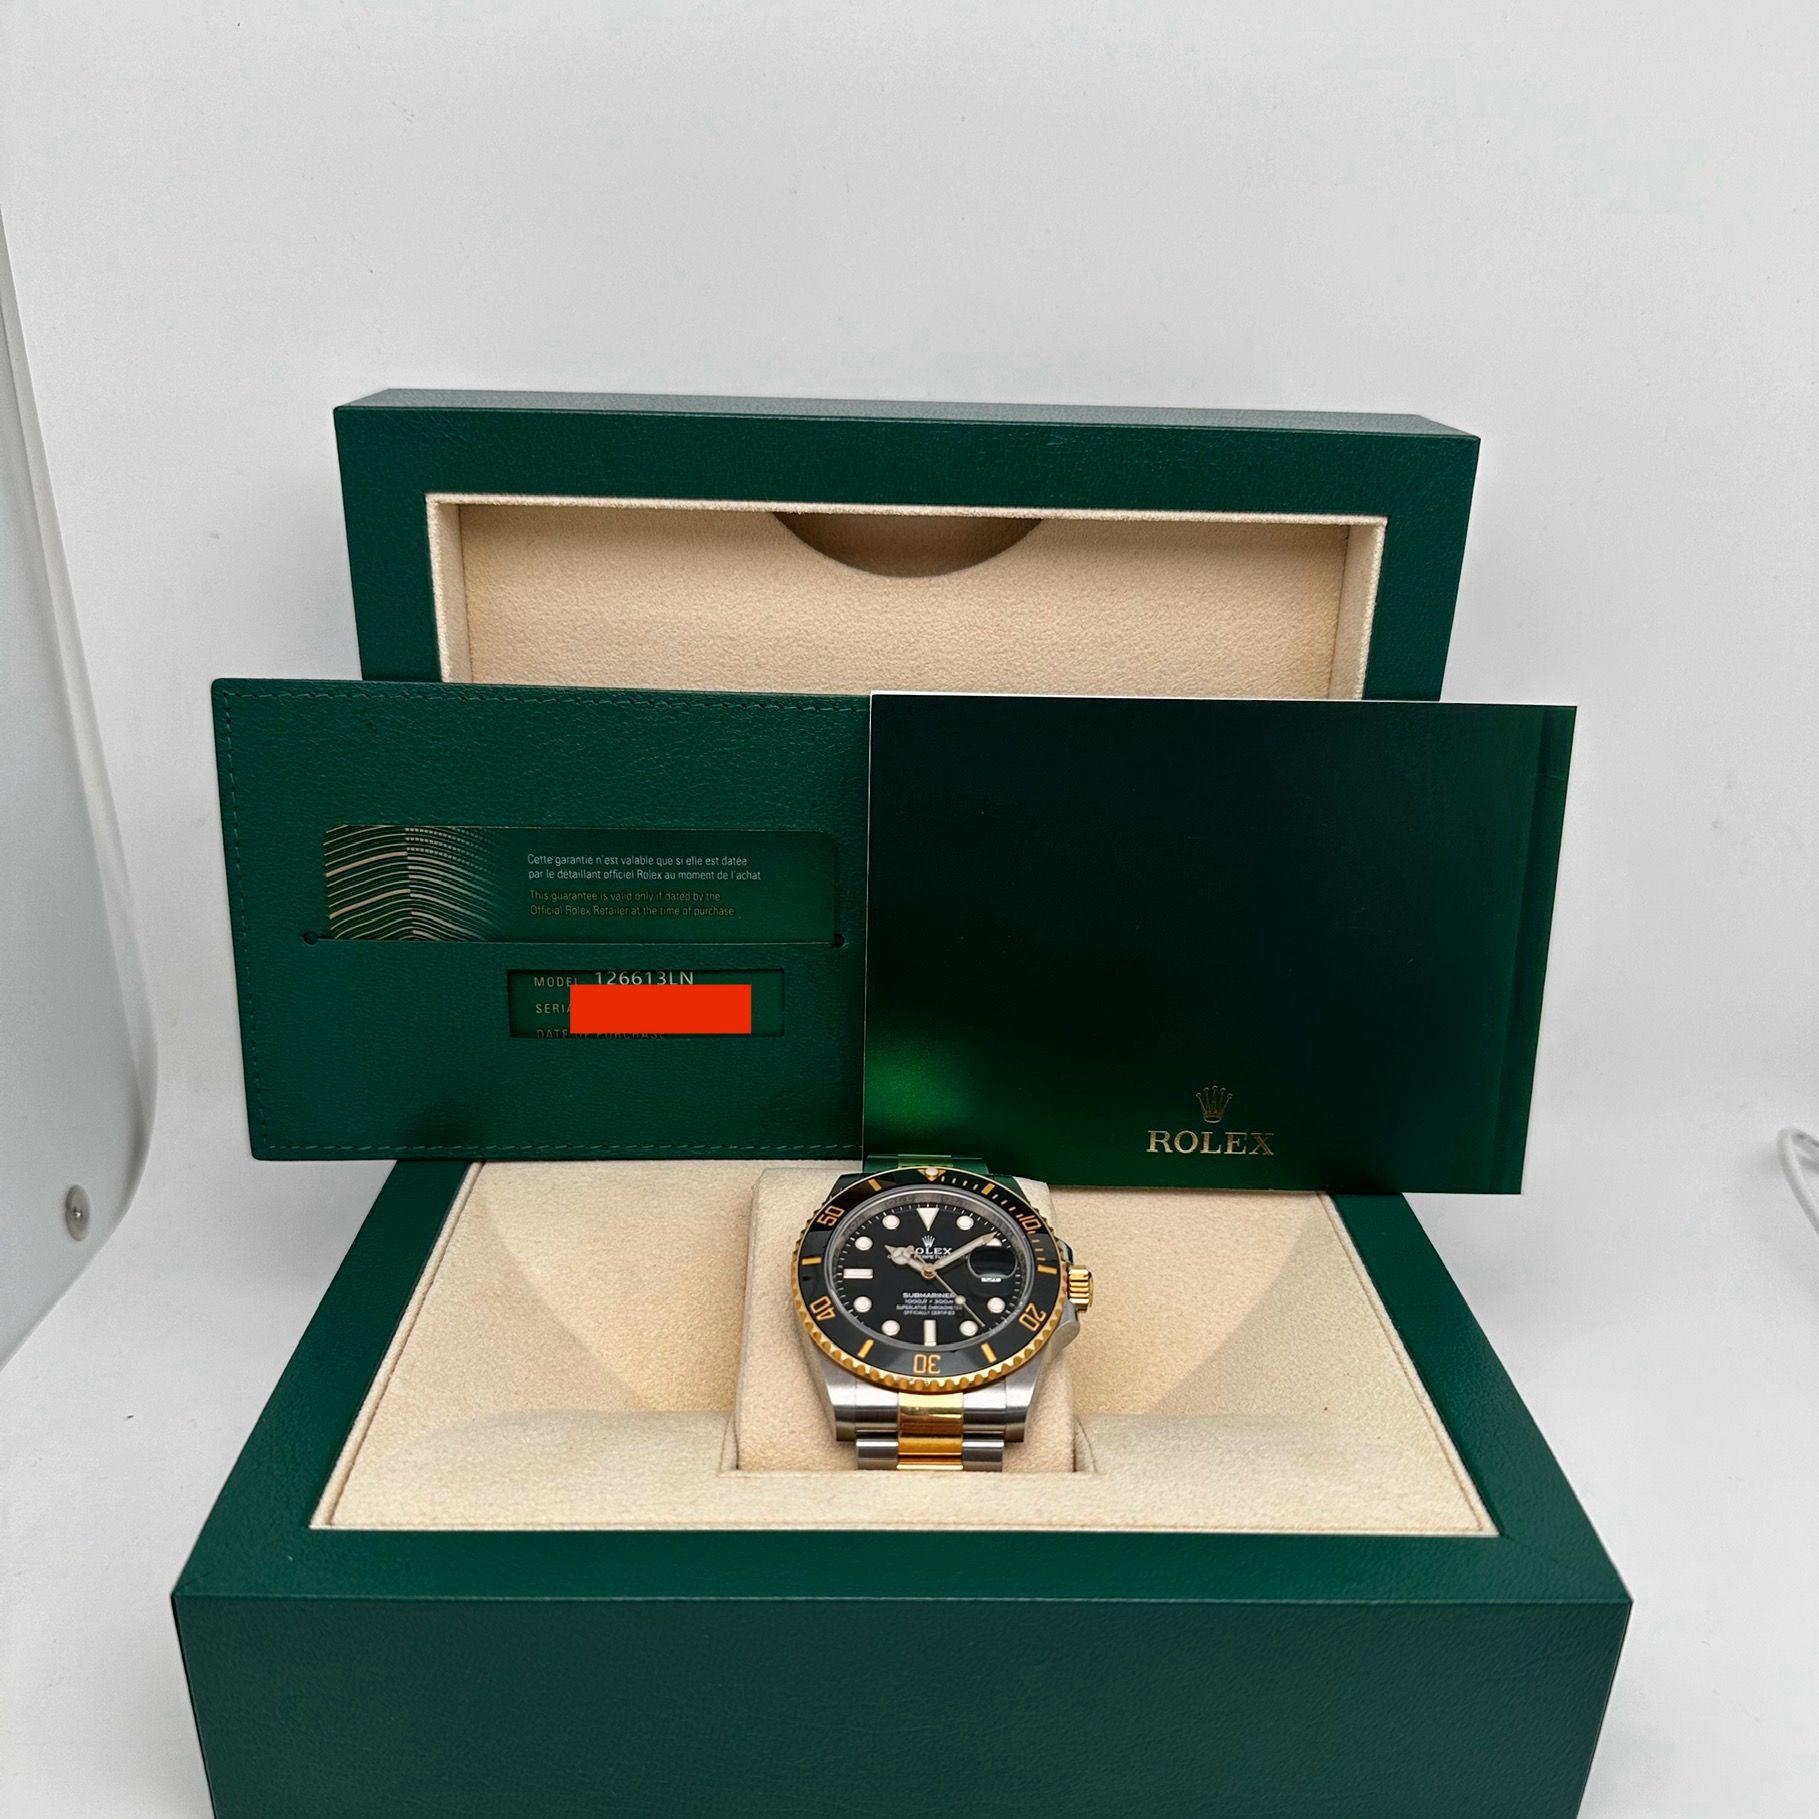 Pre-owned. Excellent condition. Box and paper included.

* Free Shipping within the USA
* Three-year warranty coverage
* 14-day return policy with a full refund. Buyers can verify the watch's authenticity at any boutique or dealership within this